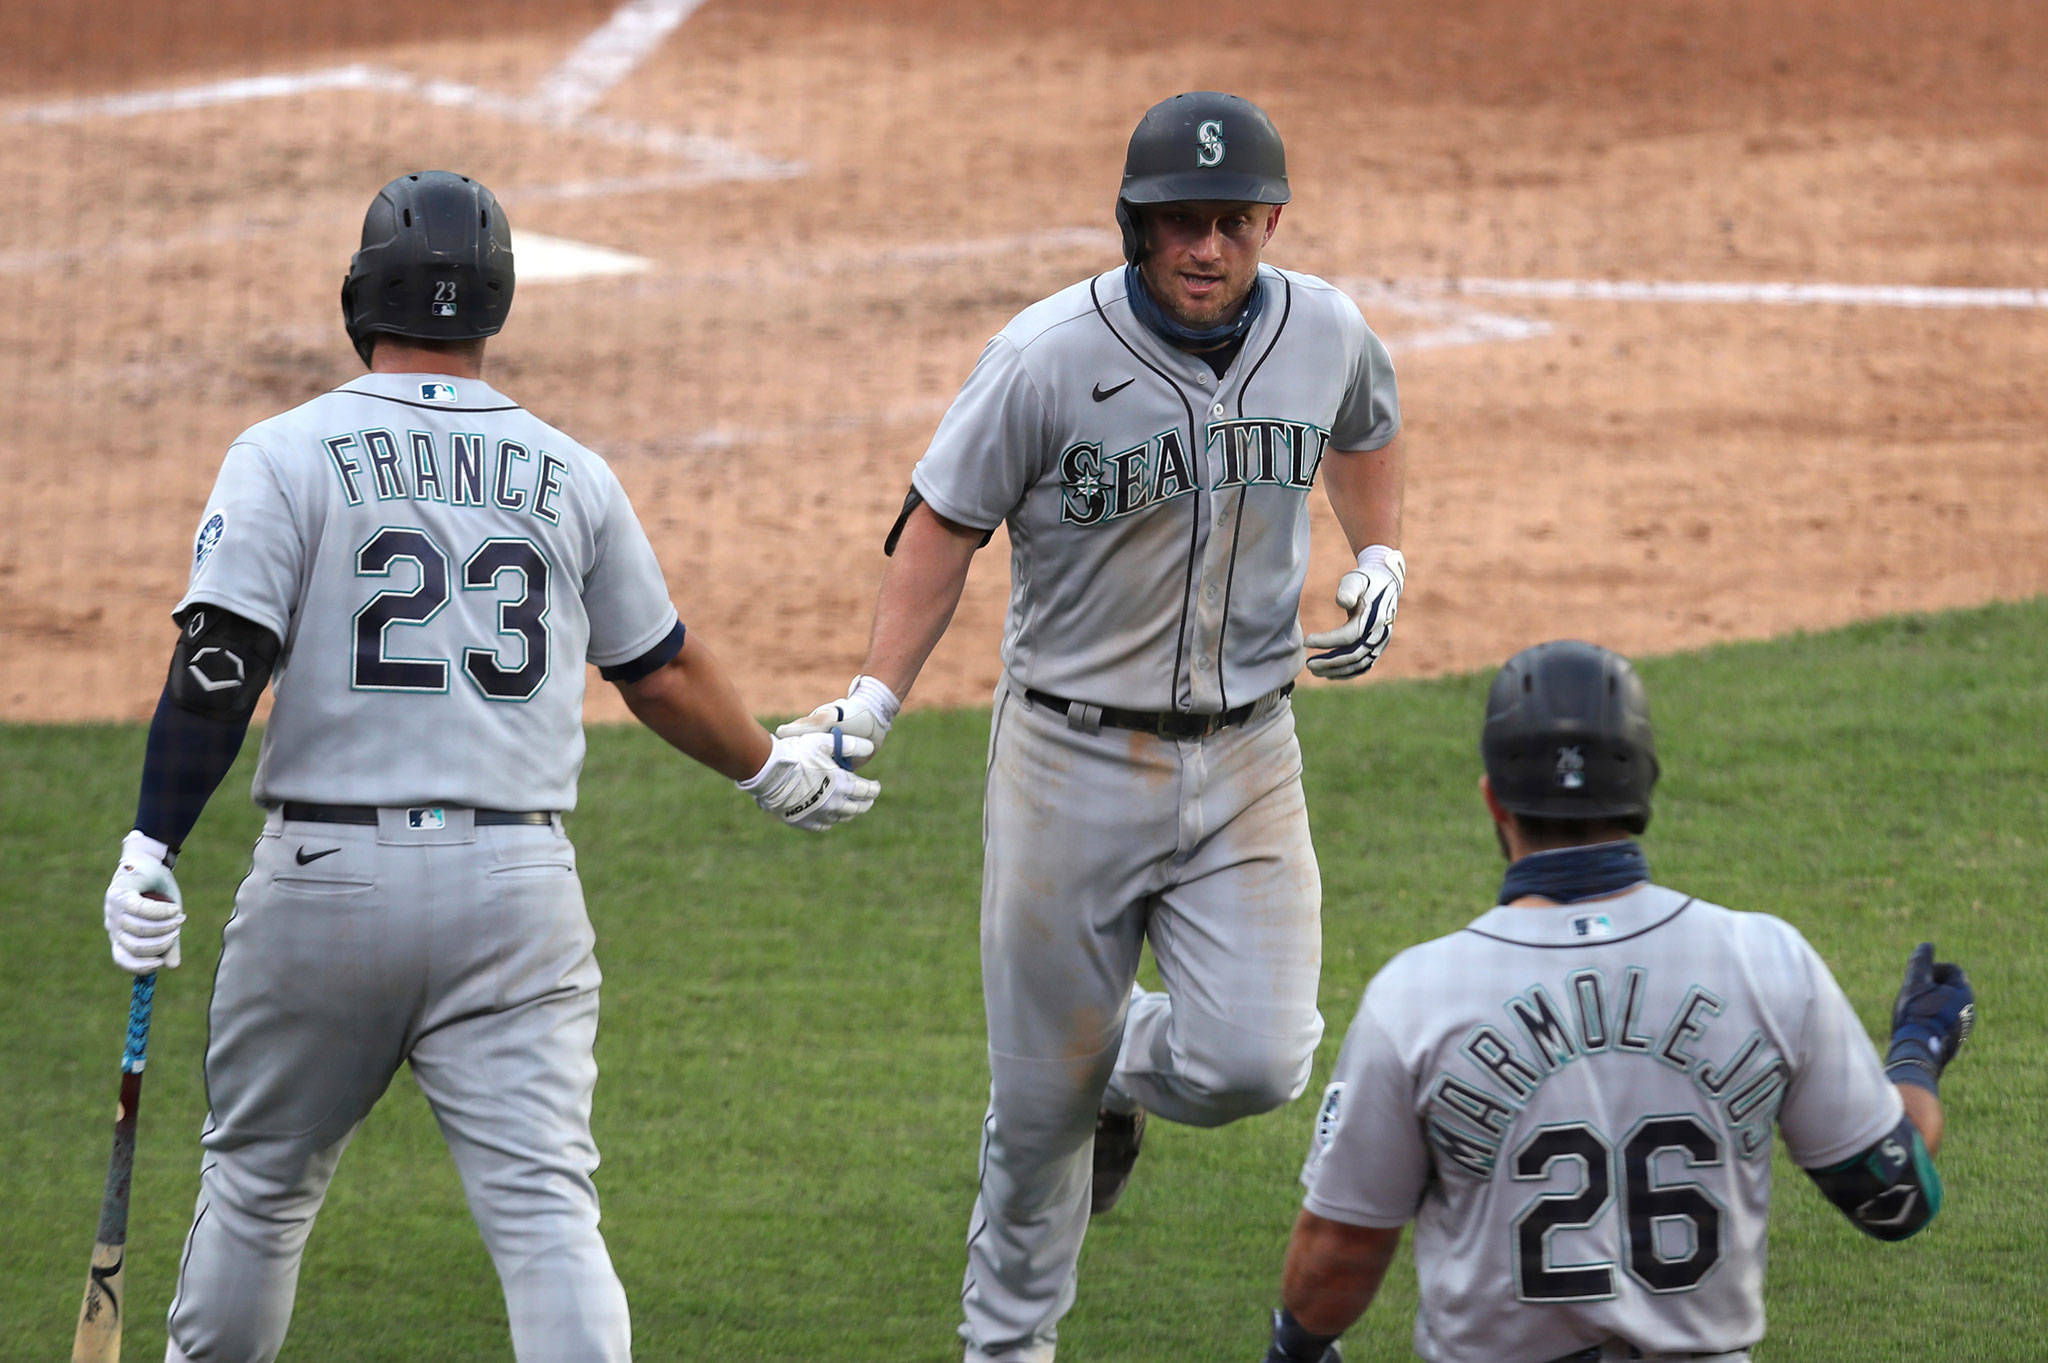 The Mariners’ Kyle Seager (center) celebrates with teammates Ty France and José Marmolejos after hitting a solo home run during the fourth inning of the second game of a doubleheader against the Athletics on Sept. 26, 2020, in Oakland, Calif. (AP Photo/Jed Jacobsohn)